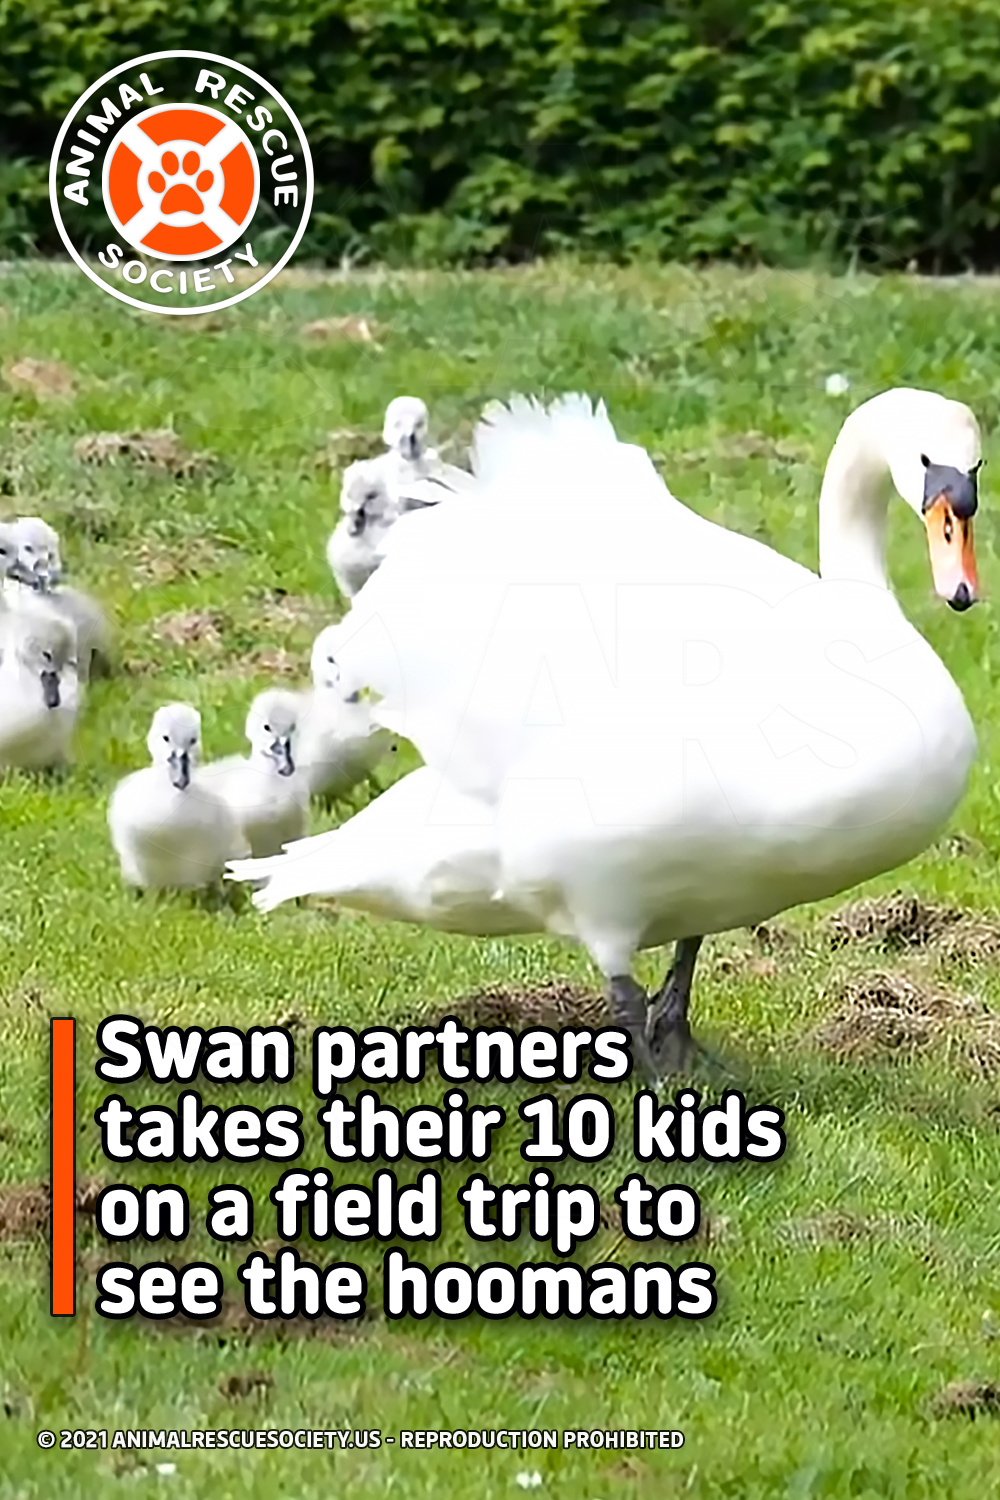 Swan partners takes their 10 kids on a field trip to see the hoomans